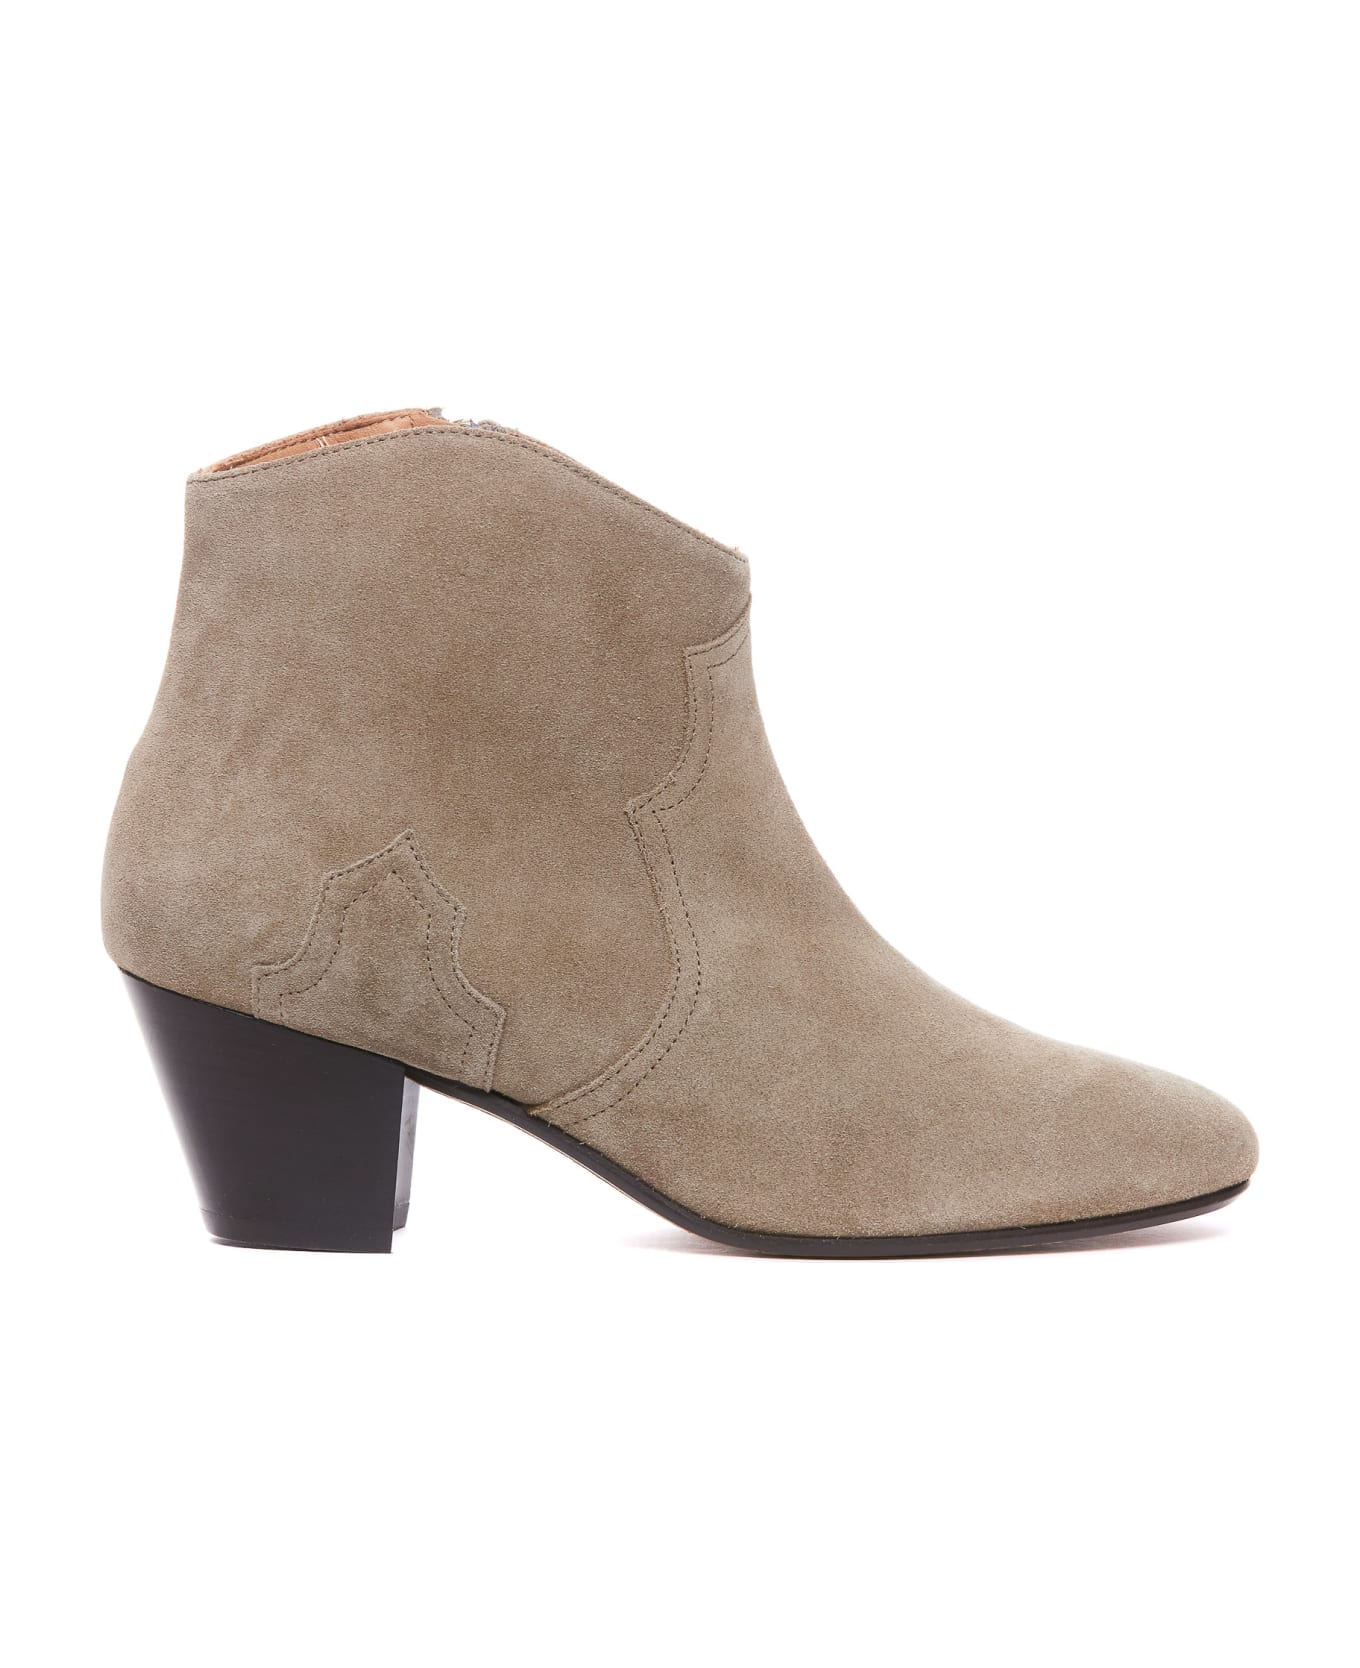 Isabel Marant Dicket Ankle Boots - Beige ブーツ